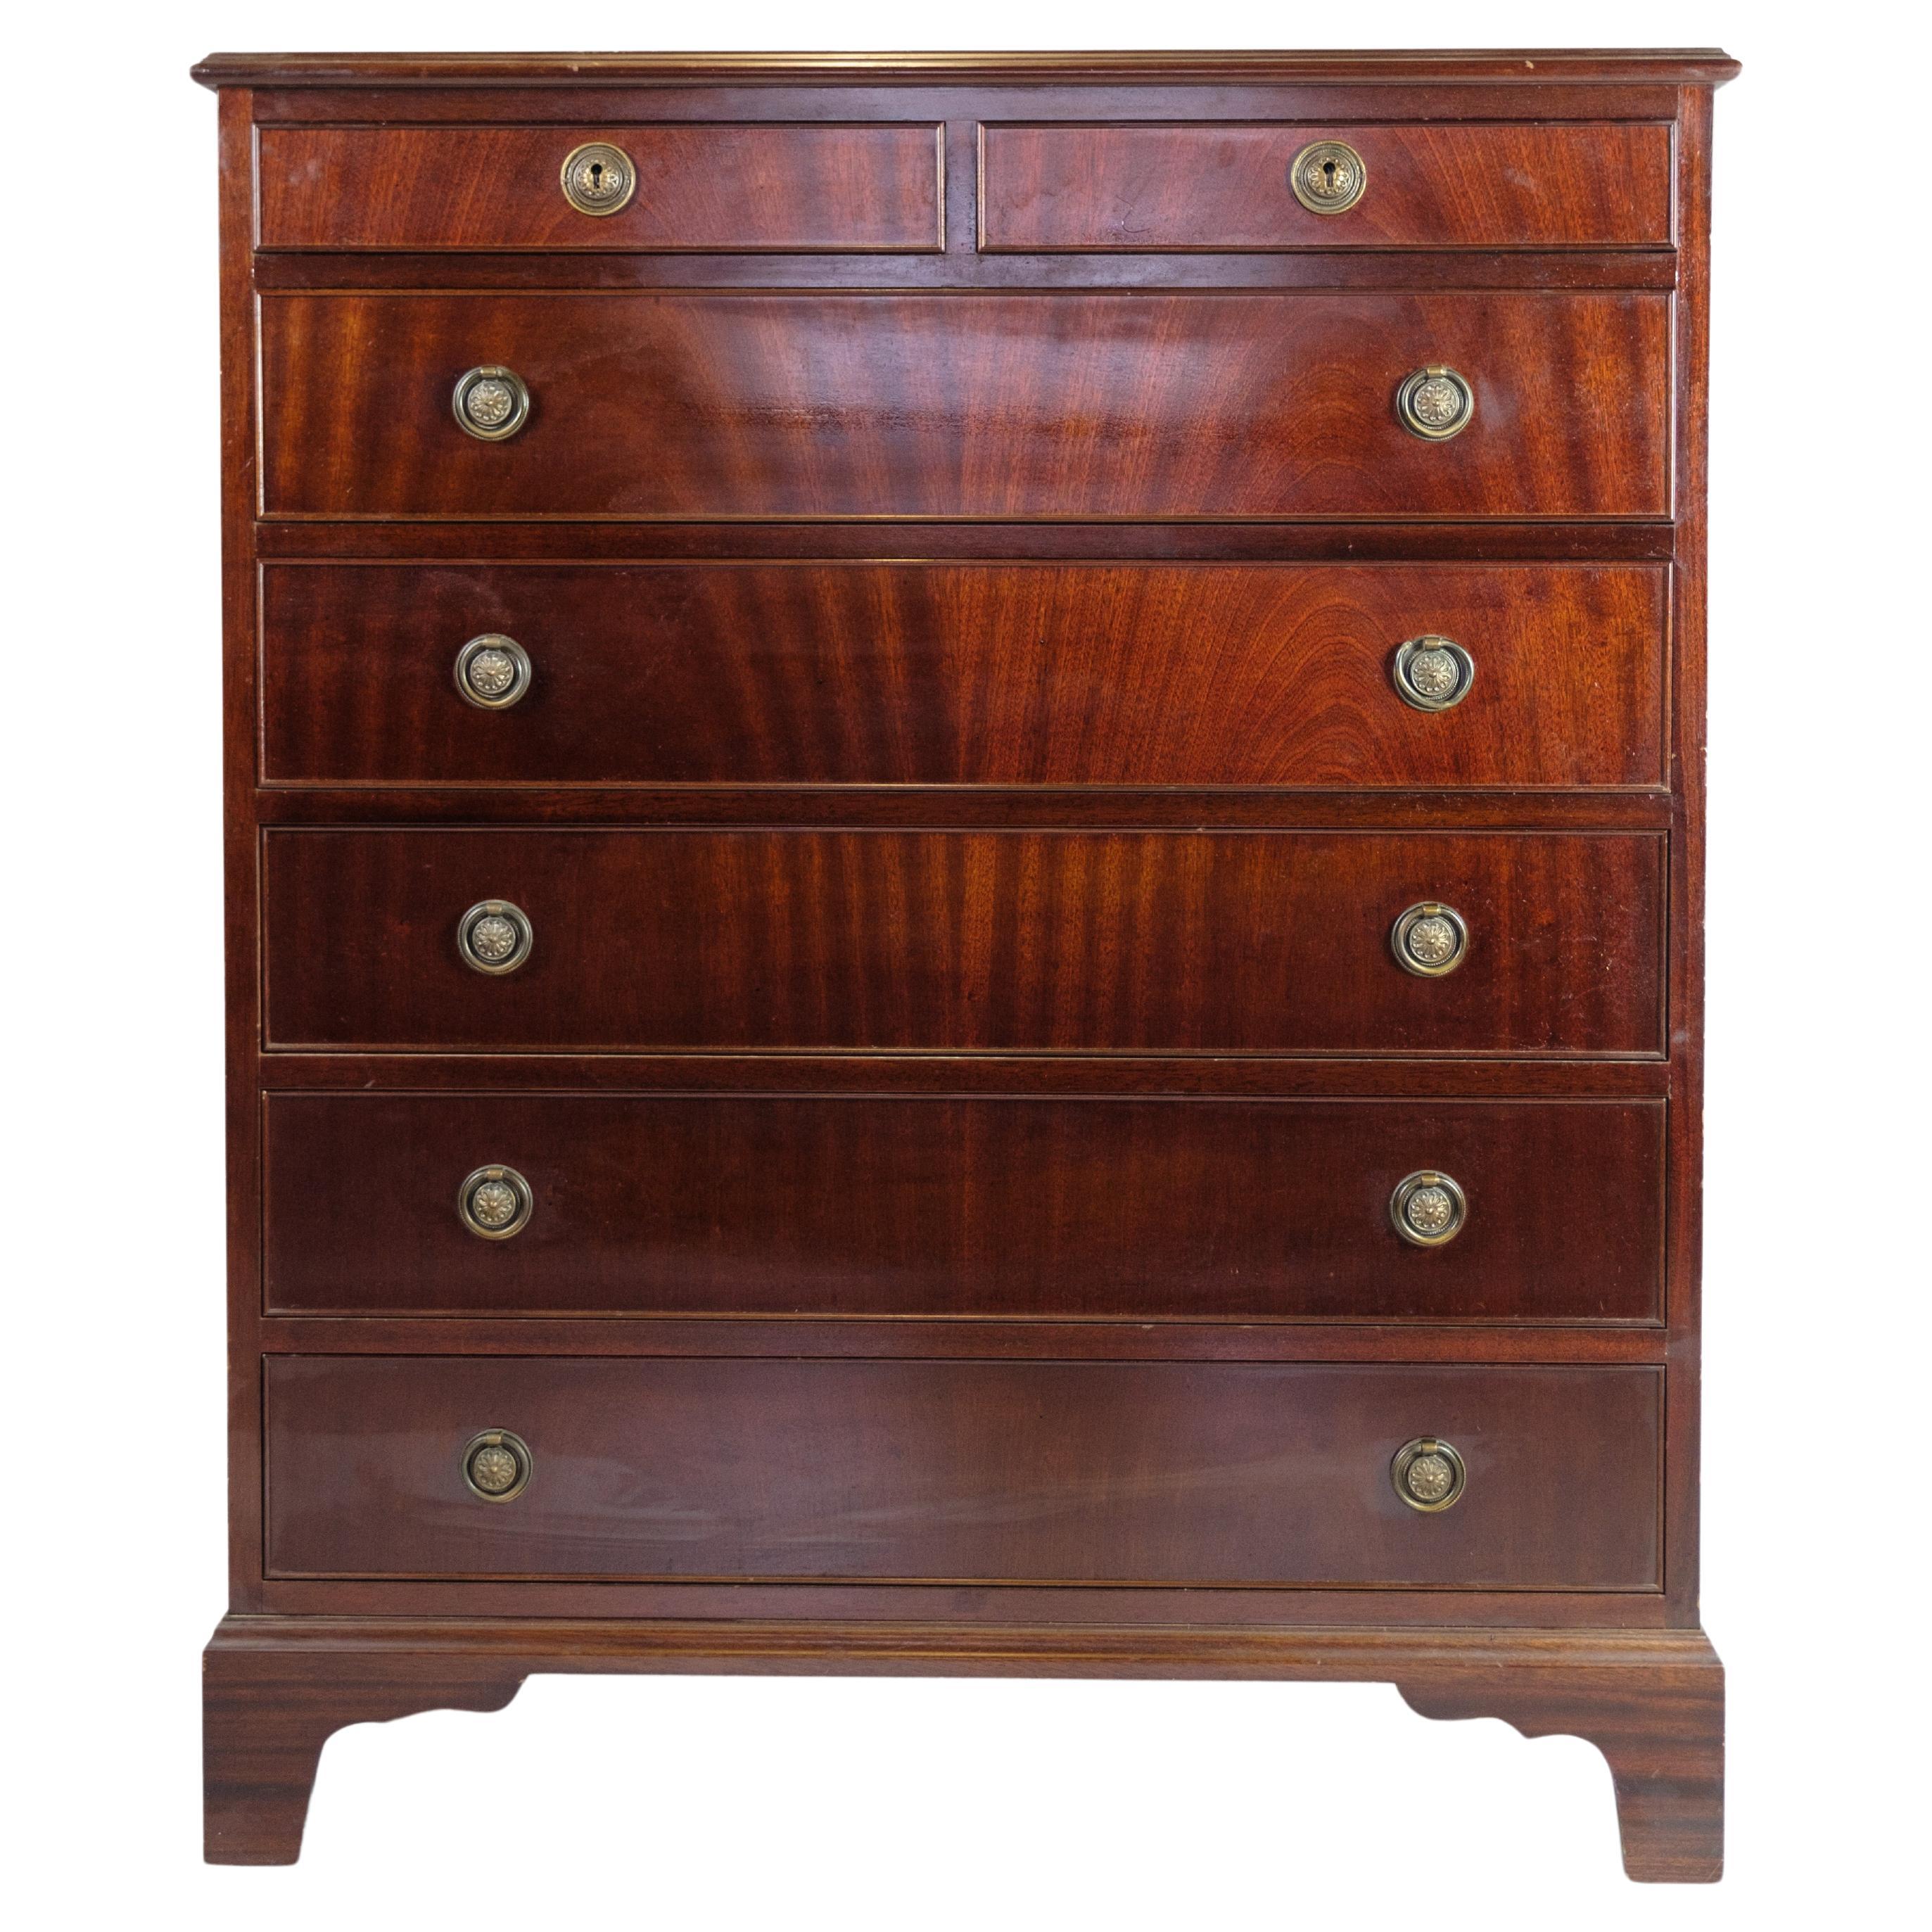 Chest of drawers In Mahogany With 7 drawers and Brass handles From The 1930